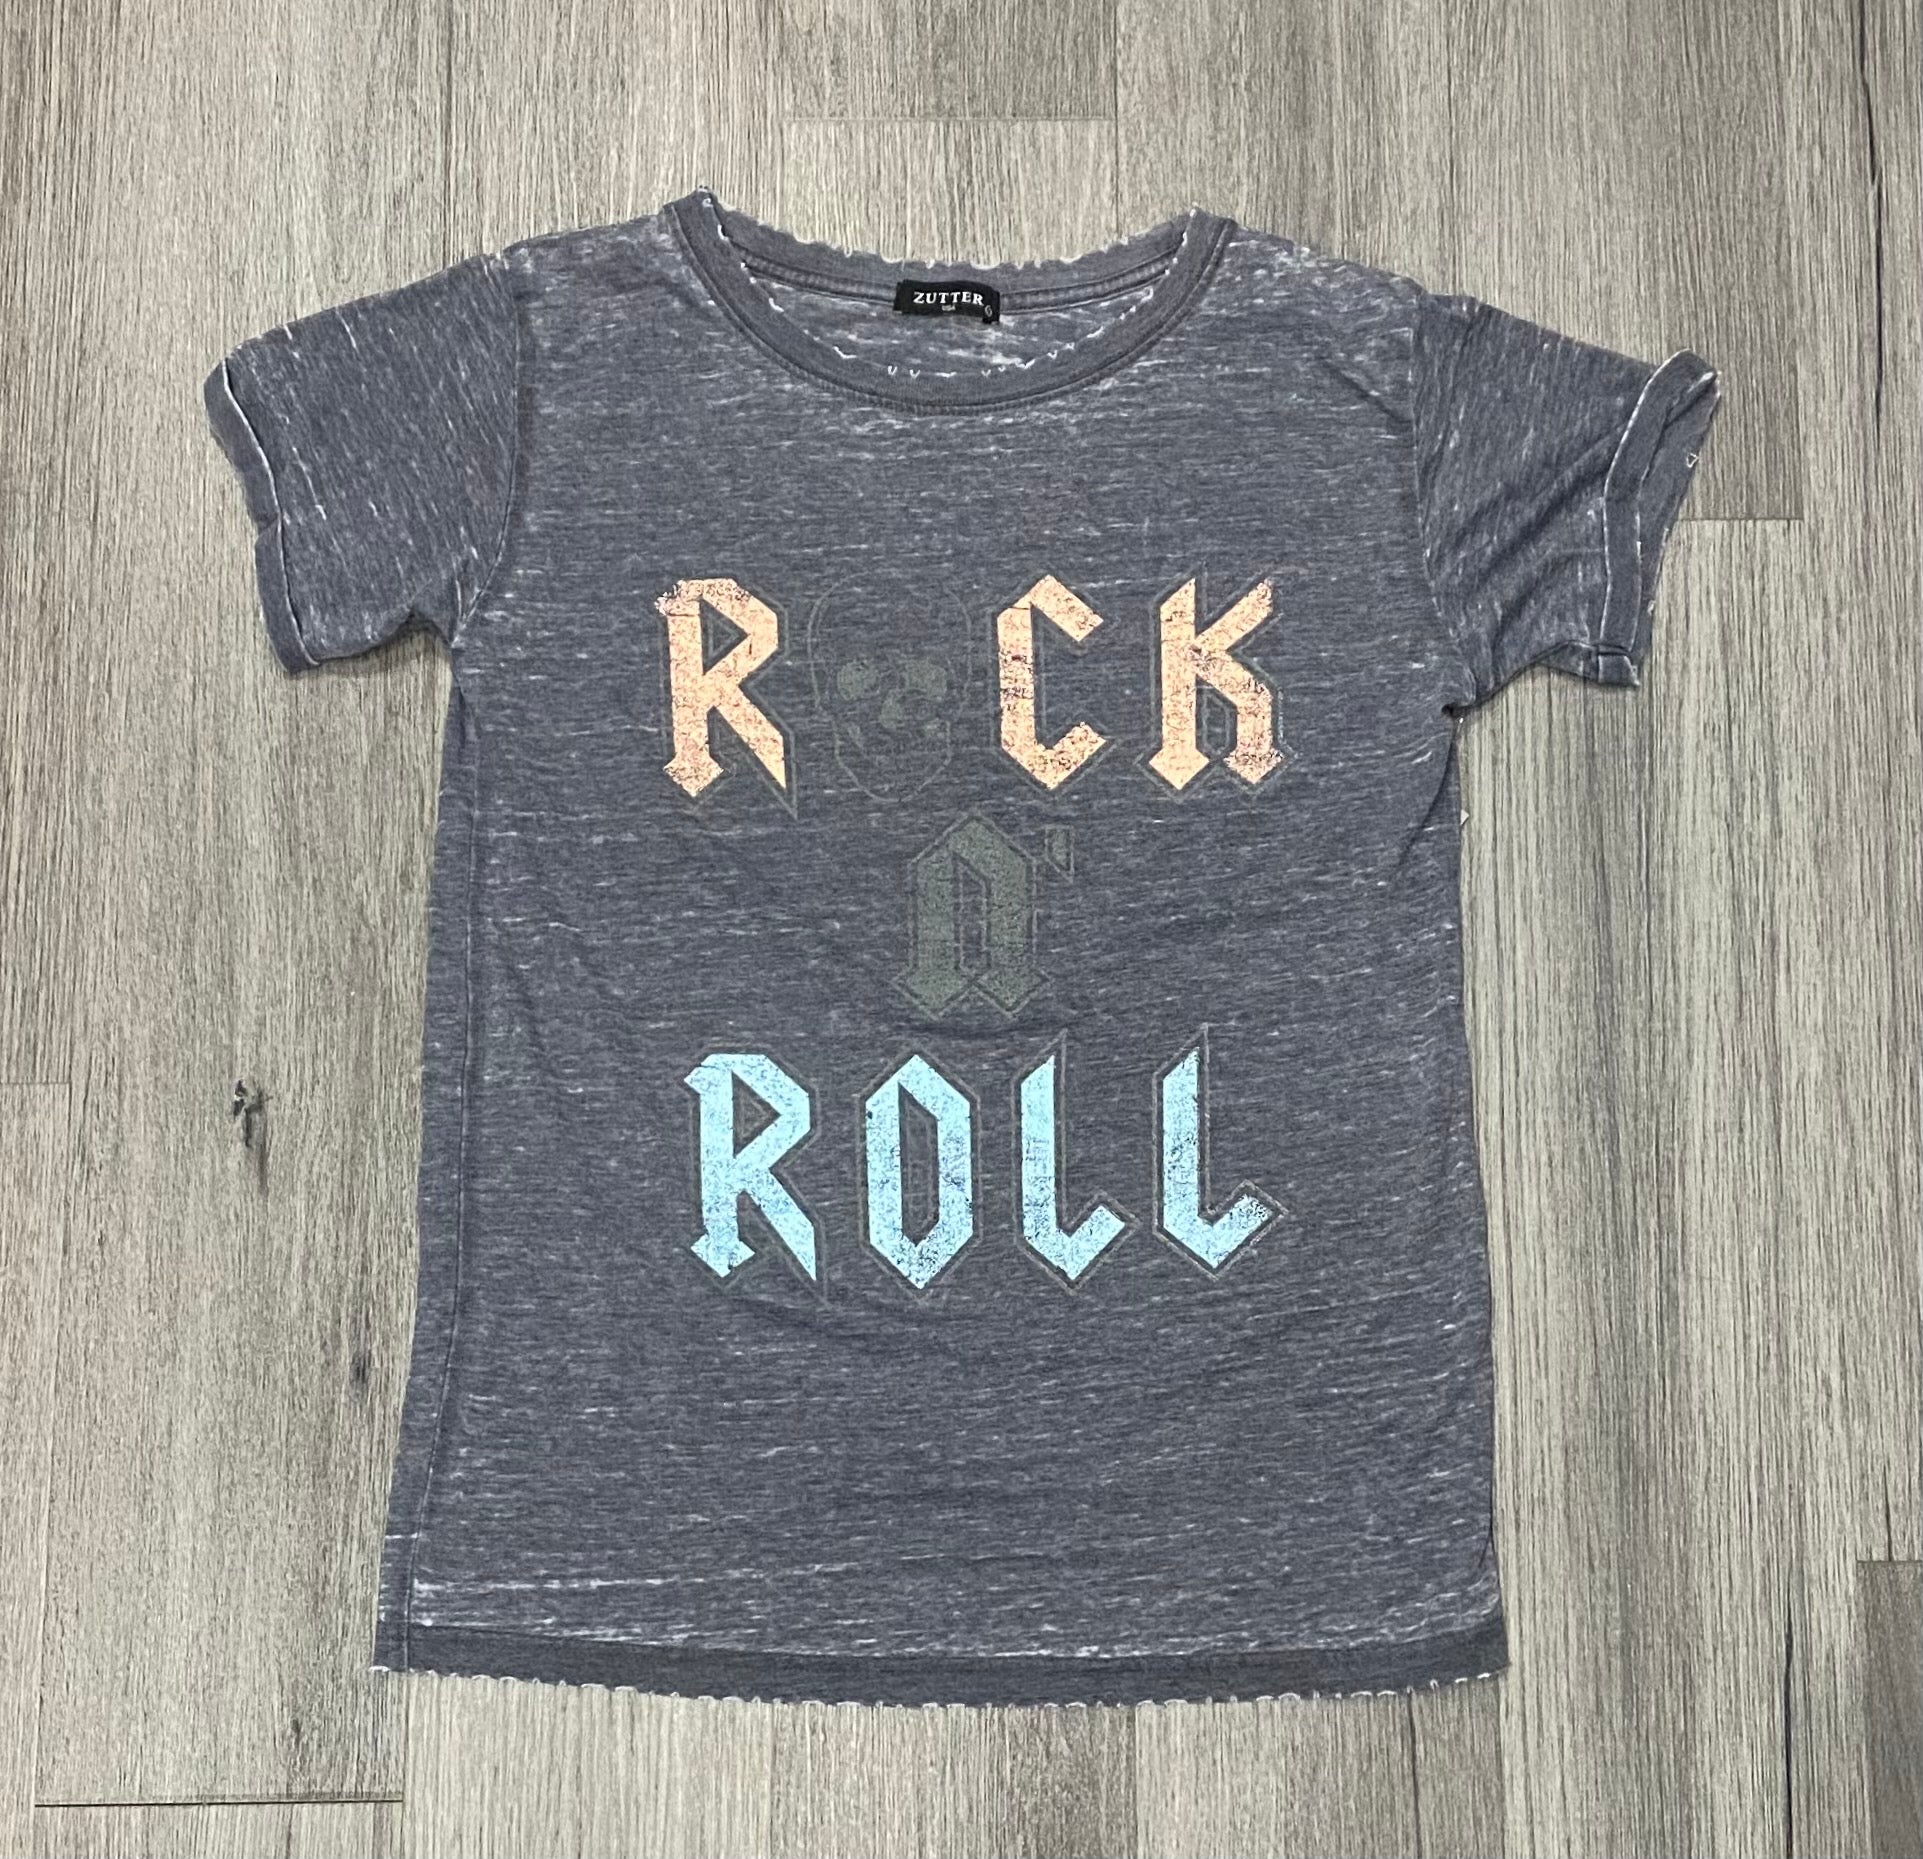 Rock N Roll graphic tee